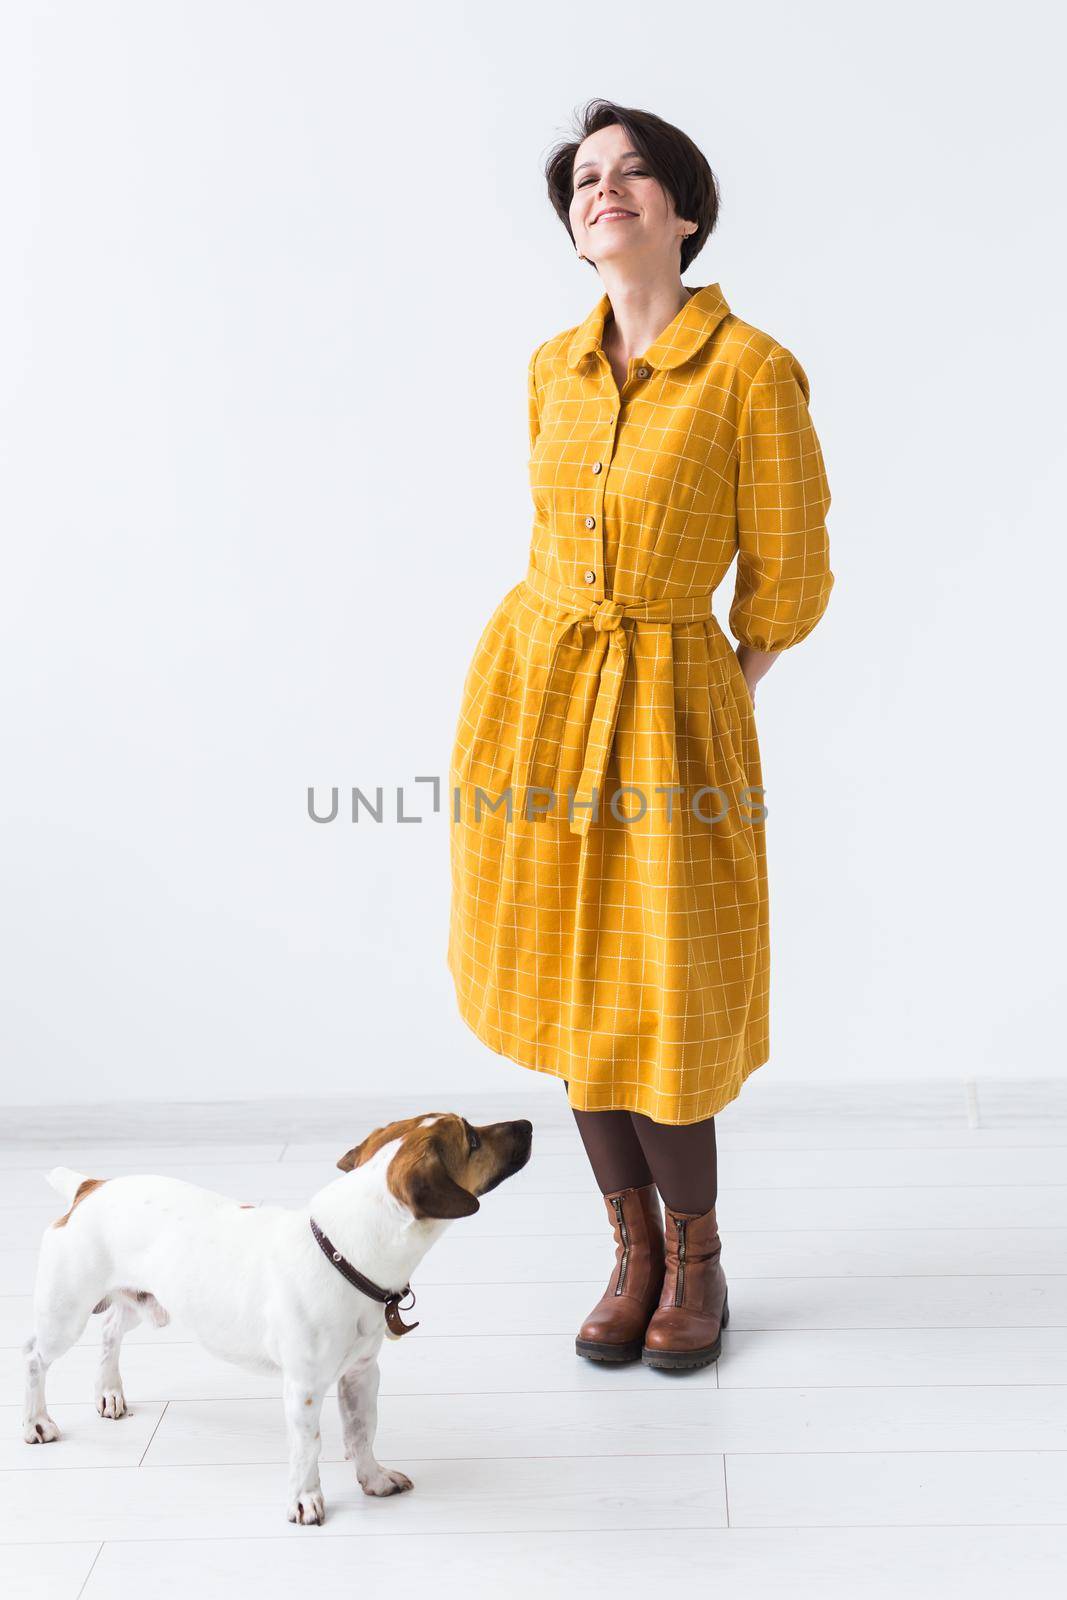 Cheerful young woman posing in a yellow dress with her beloved dog Jack Russell Terrier standing on a white background. The concept of casual wear